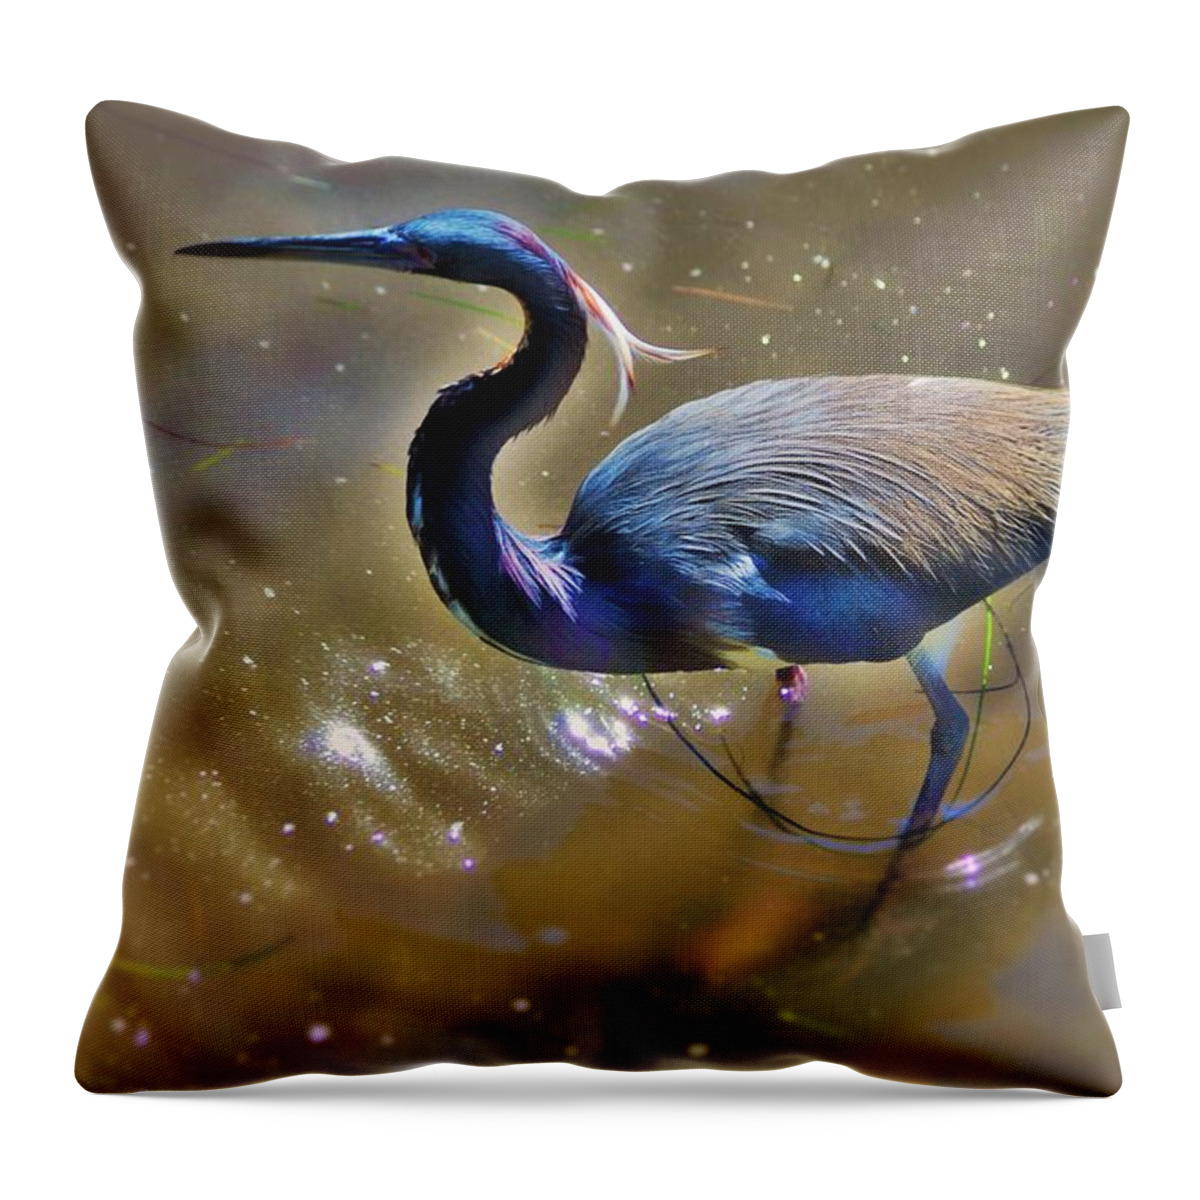  Throw Pillow featuring the photograph Green Heron by Stoney Lawrentz